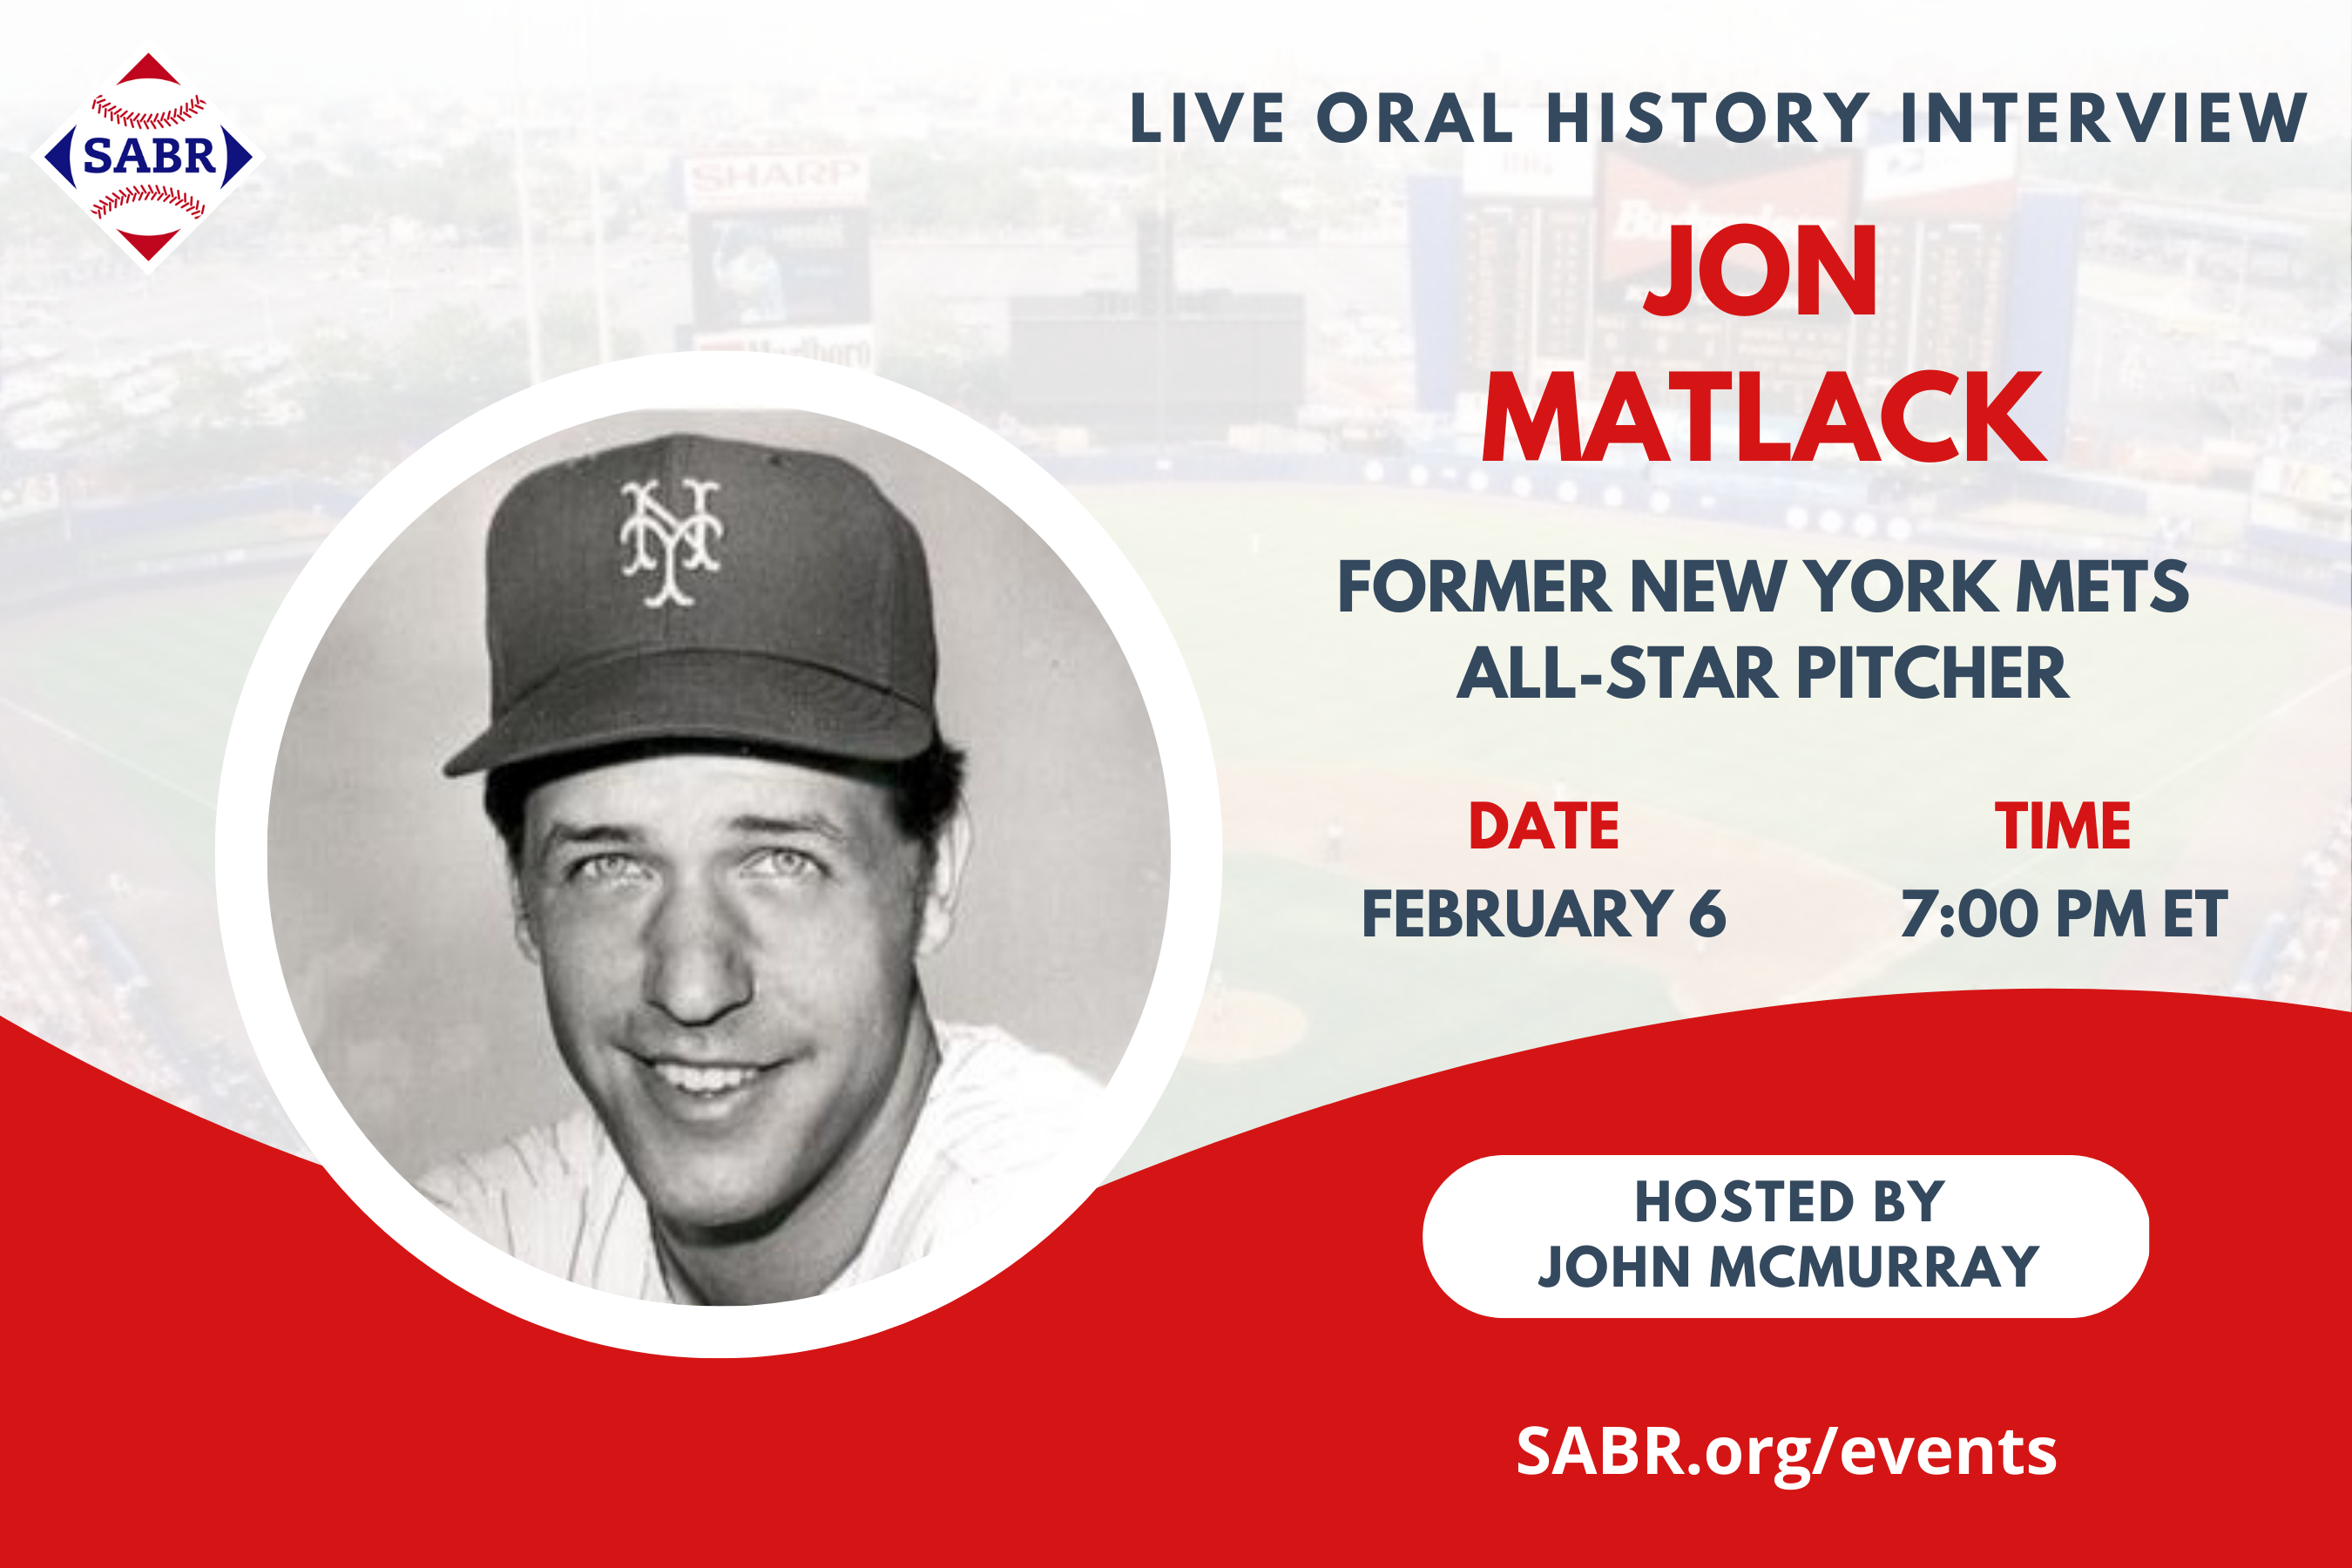 SABR Live Oral History Interview with Jon Matlack